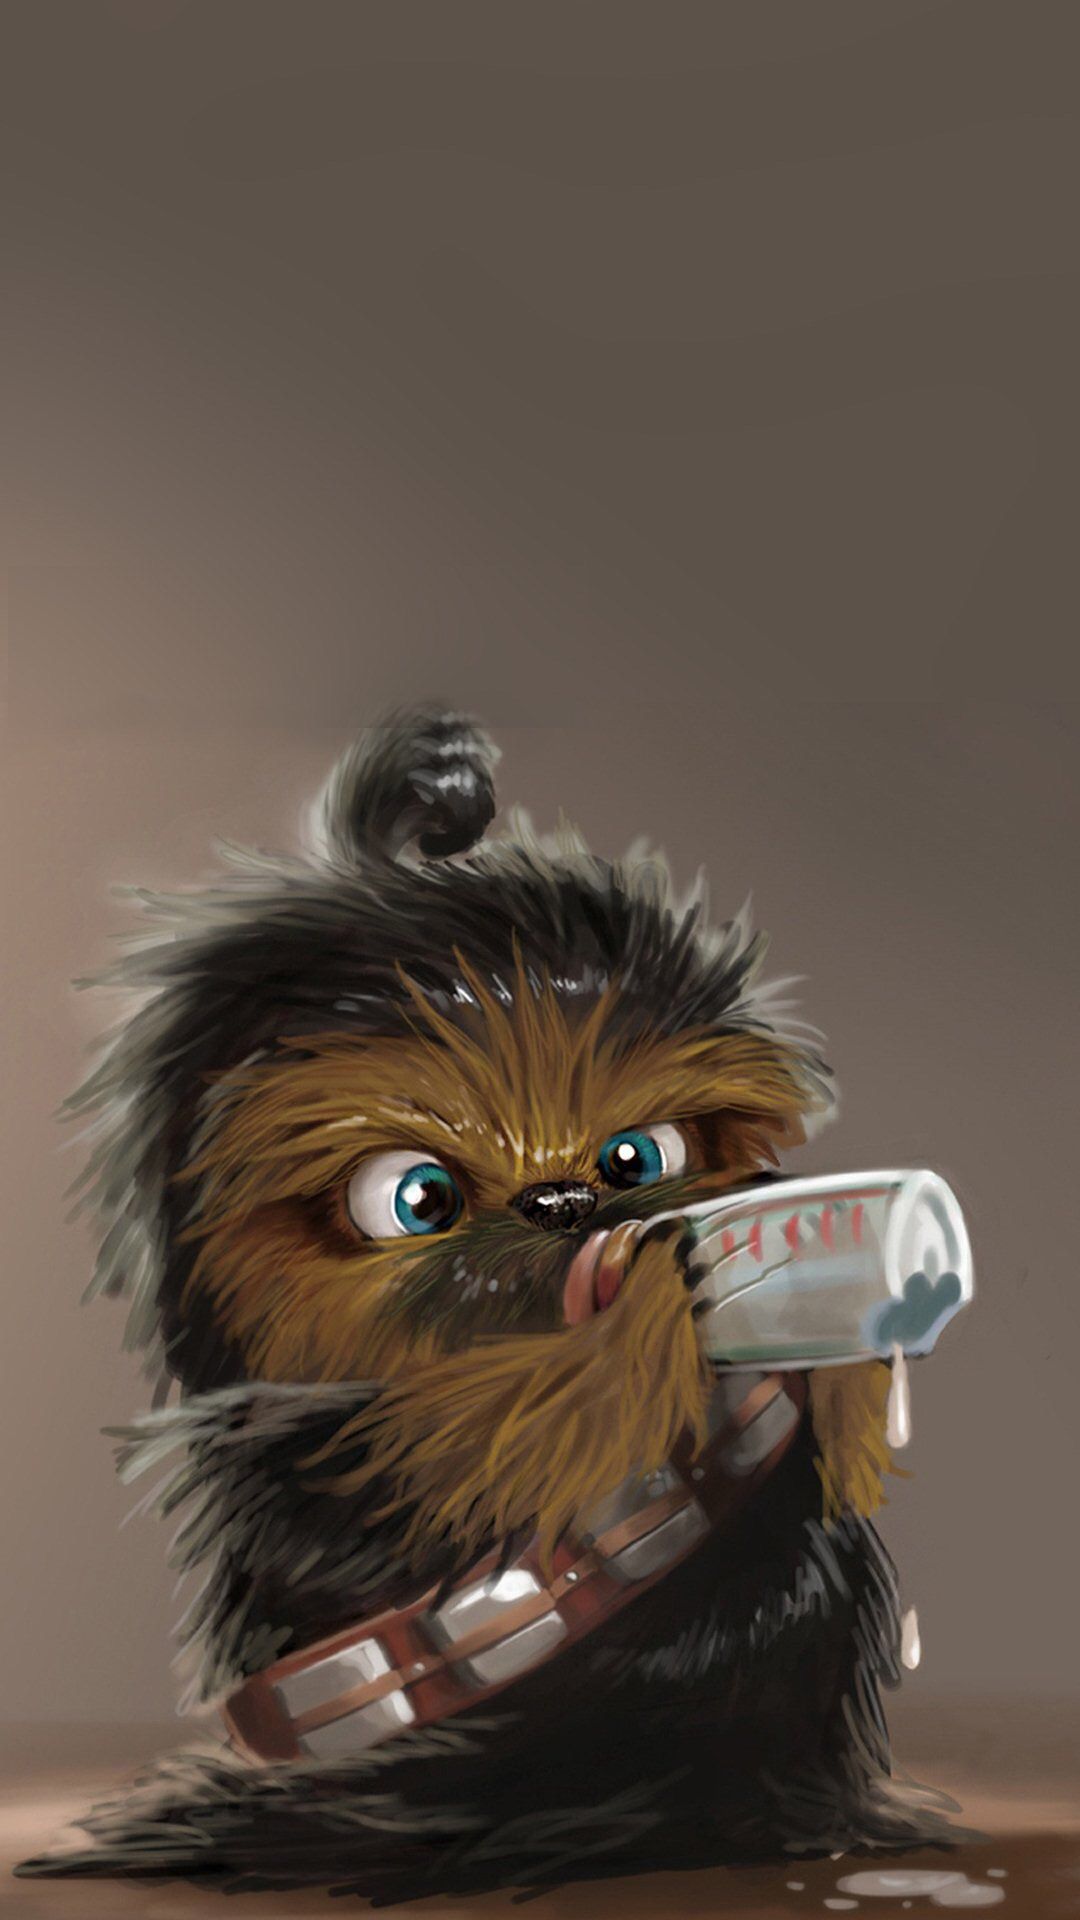 Baby Chewbacca Star Wars iPhone Android Phone Wallpaper Background